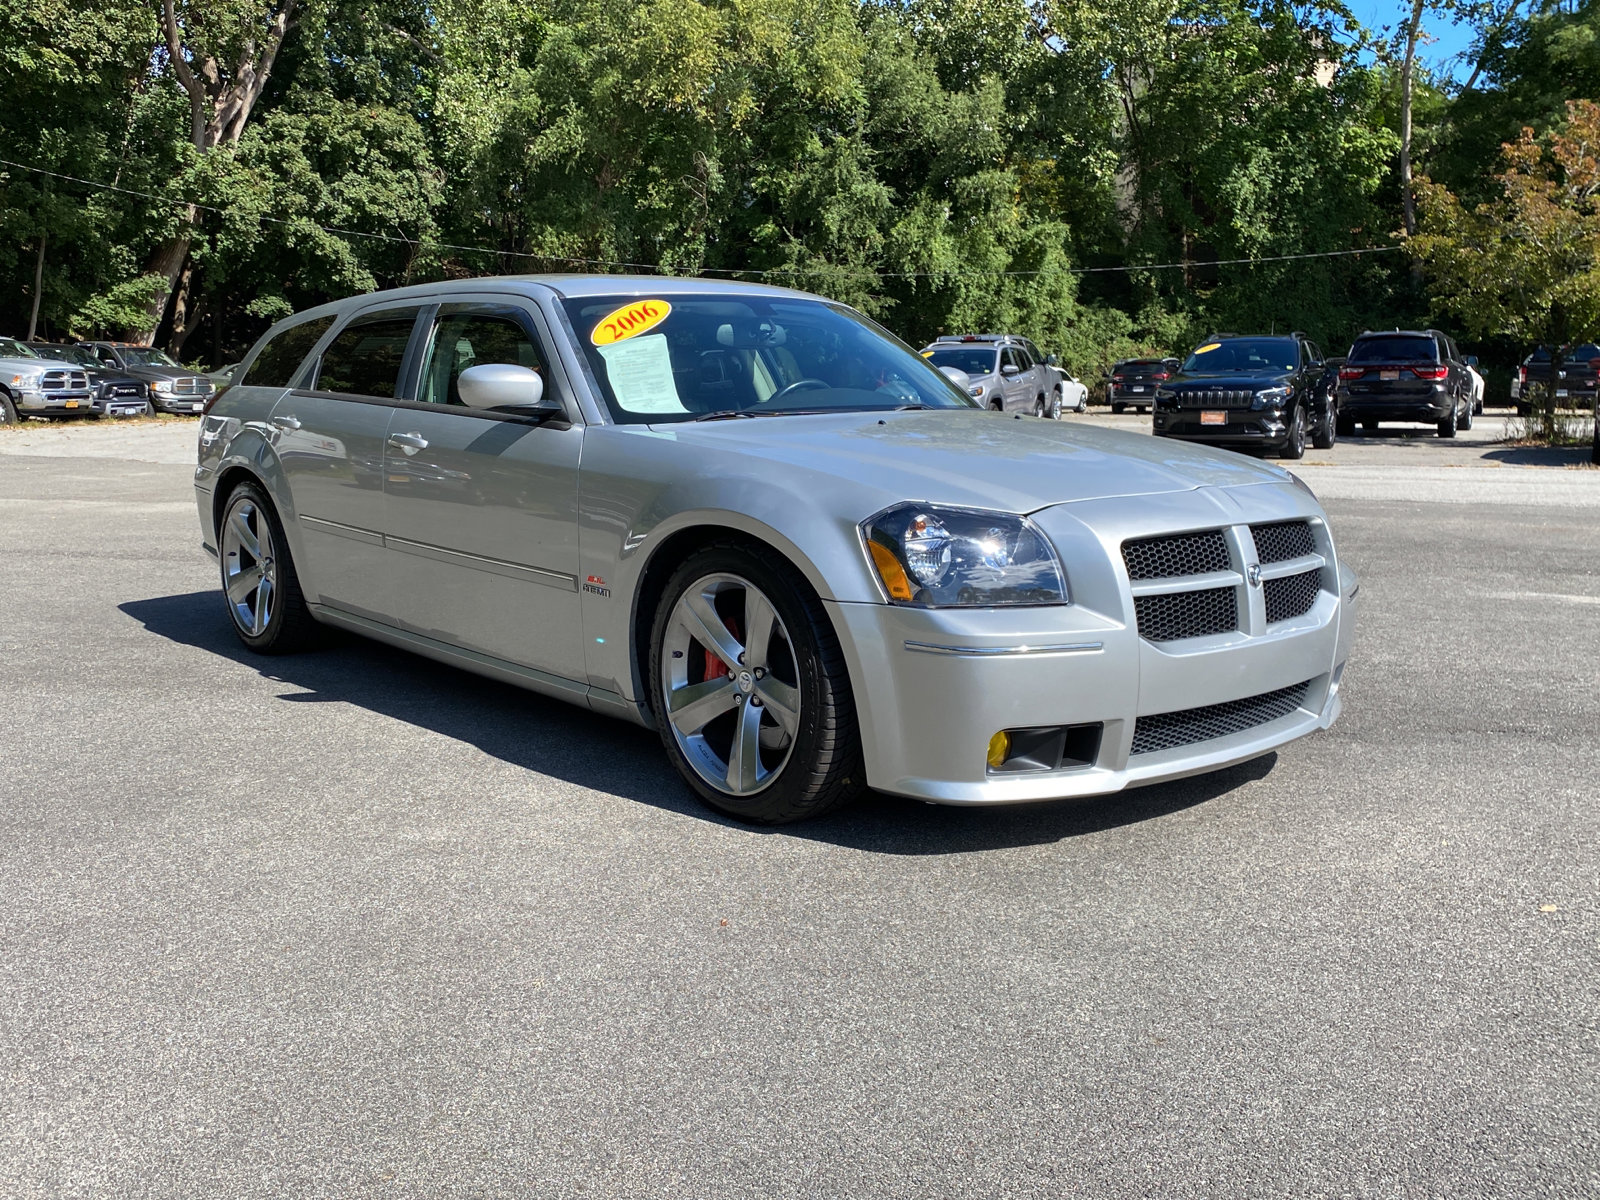 Used 2006 Dodge Magnum for Sale Right Now - Autotrader